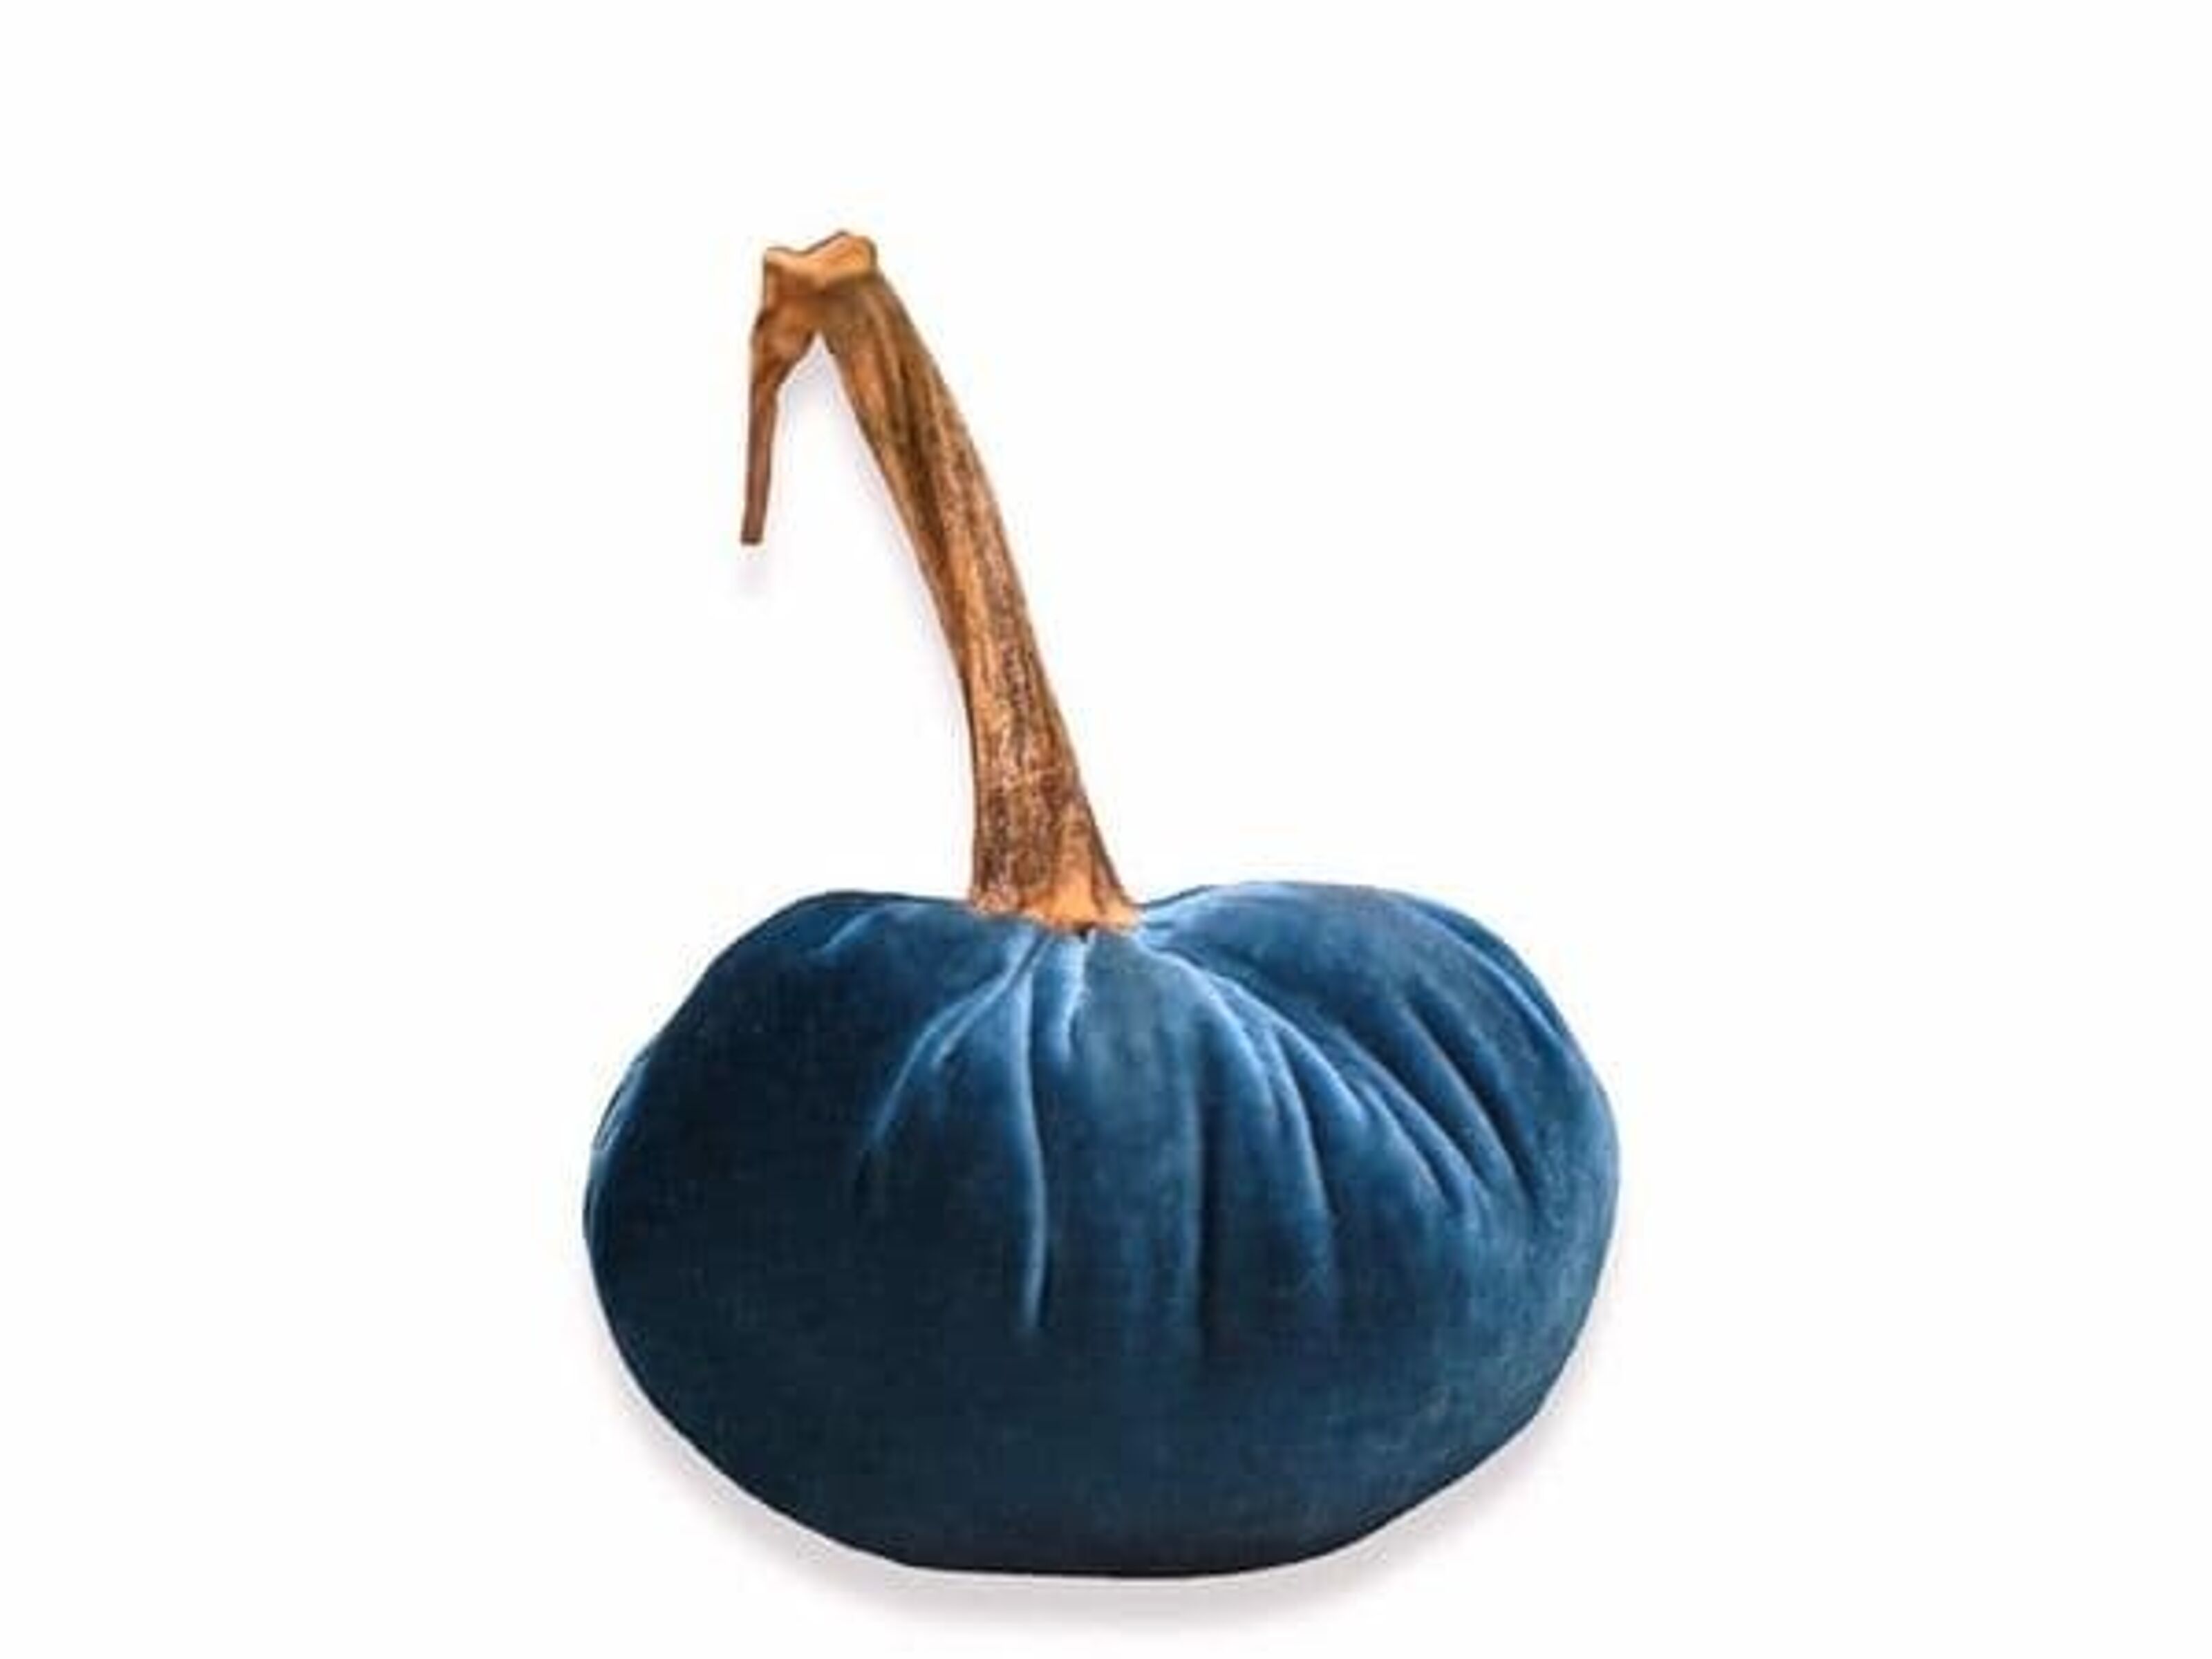 Free 2-day shipping. Buy SUPERHOMUSE Velvet Pleated Round Pumpkin